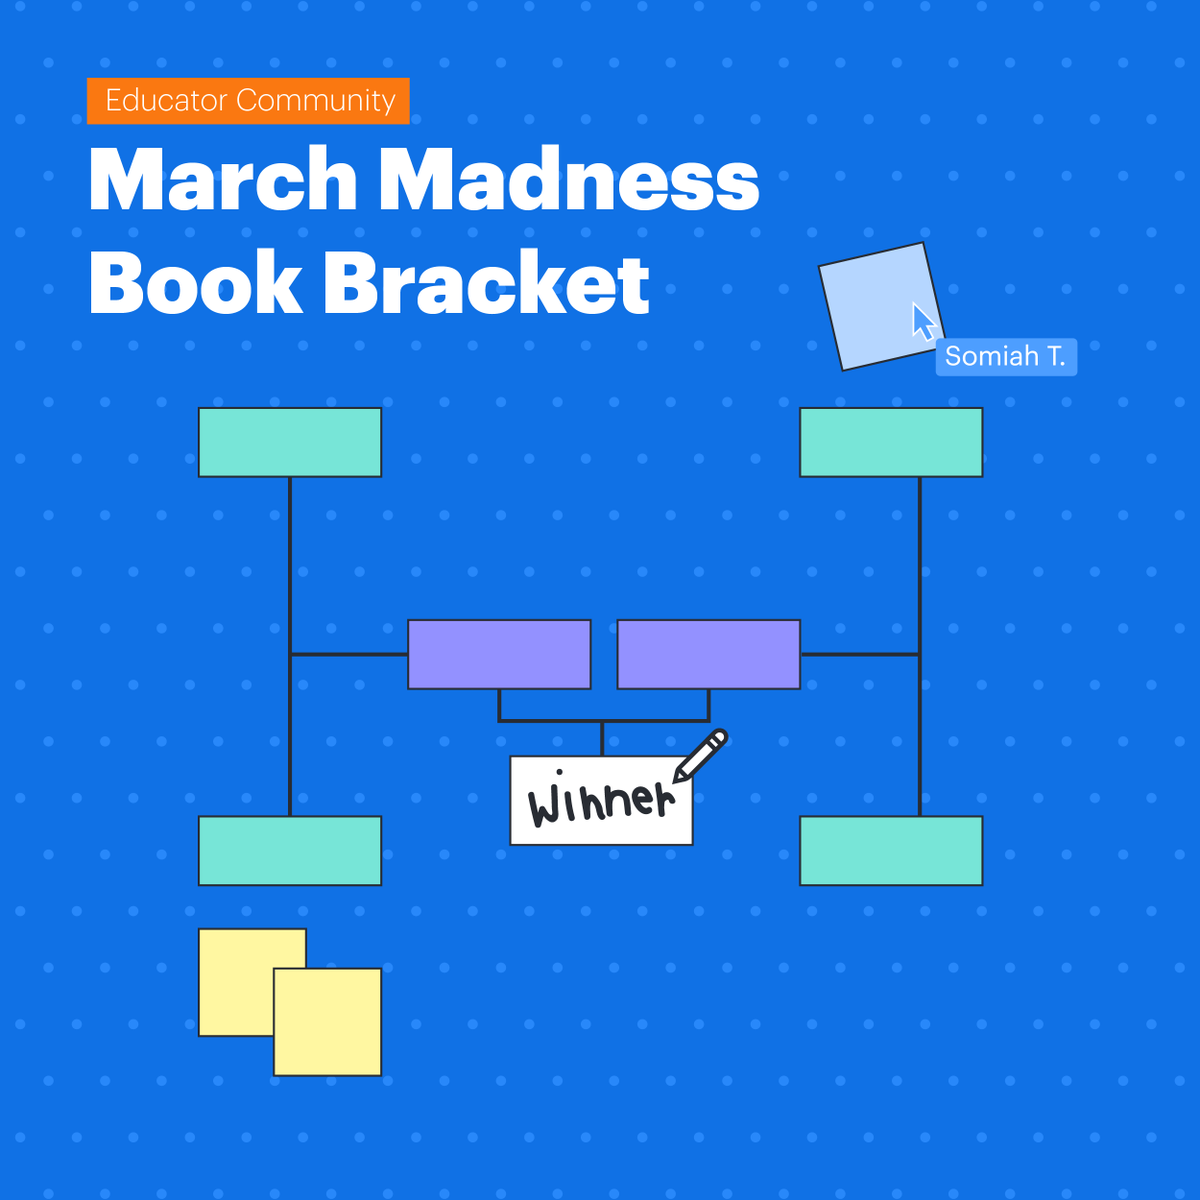 Dive into the madness with our librarian extraordinaire, making March unforgettable in our Educator community! From brackets to books, they're bringing the excitement of March Madness to our learning space. ➡️ tinyurl.com/yere83dm